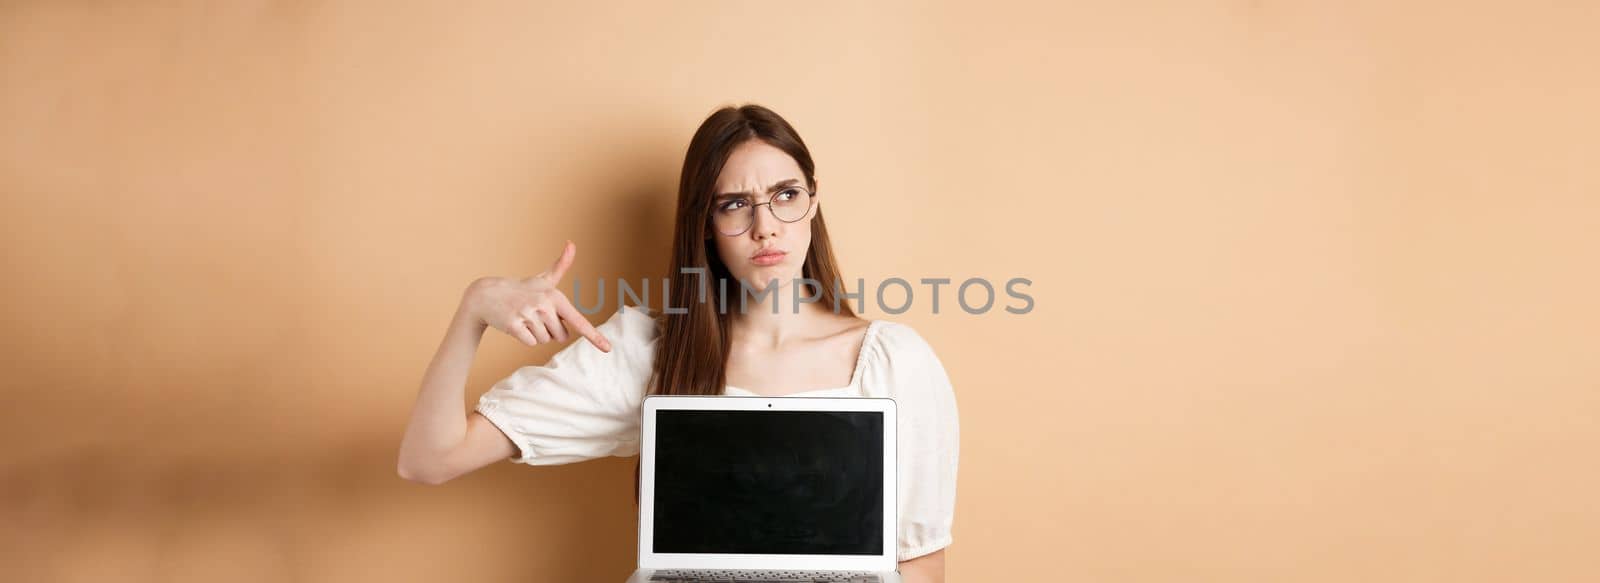 Suspicious frowning girl in glasses pointing at laptop screen, showing something strange online, standing on beige background.